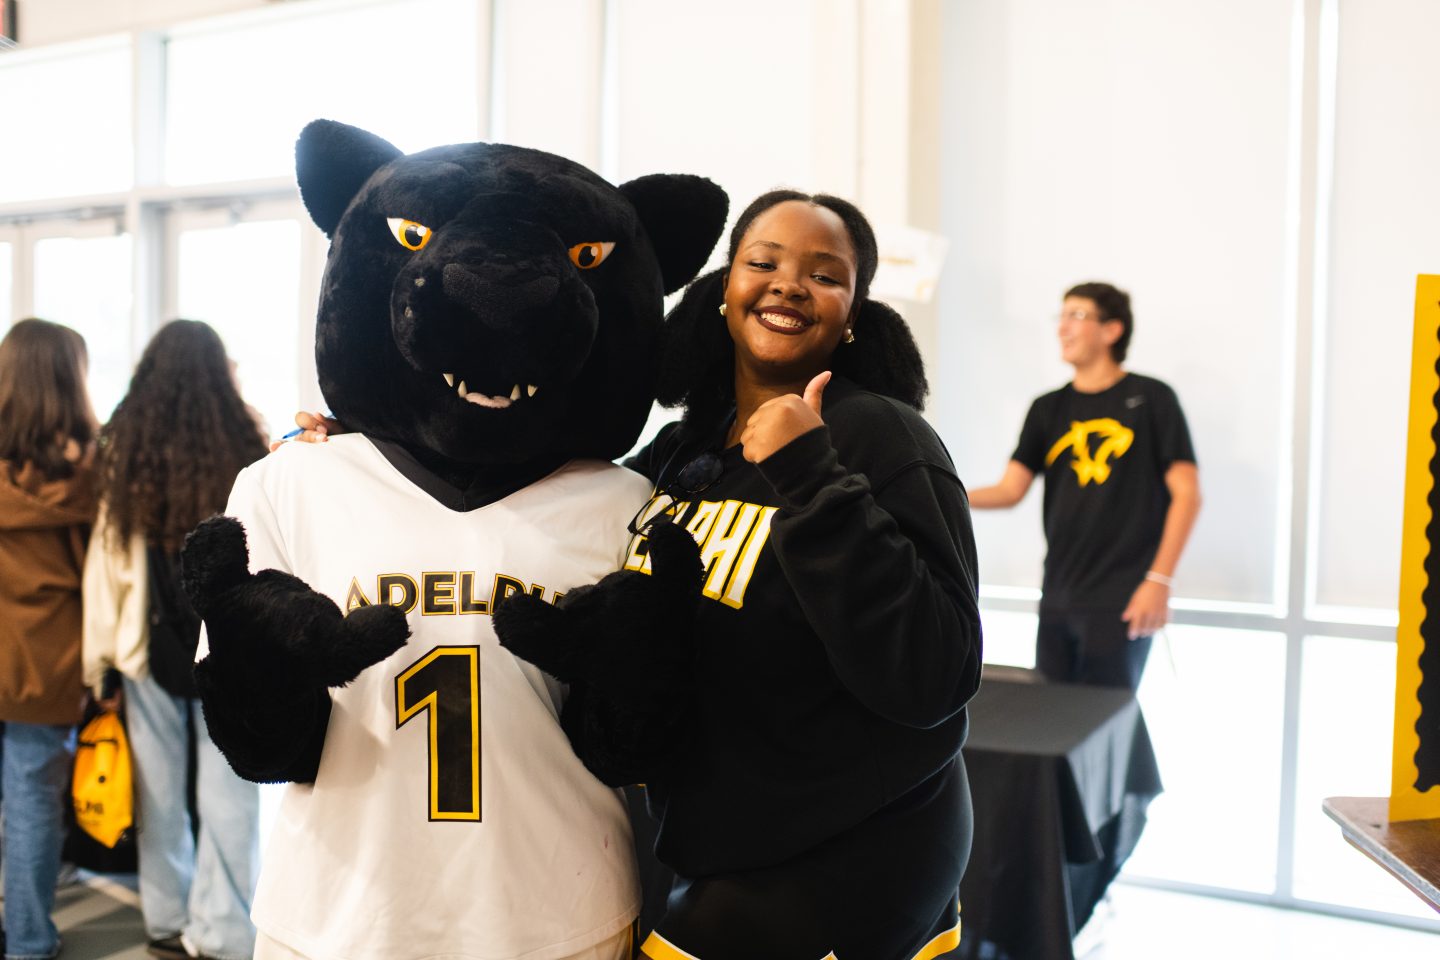 A young woman with a thumbs-up gesture posing with a person in a black panther mascot costume, both are wearing attire with matching colors, indicating team or school spirit.